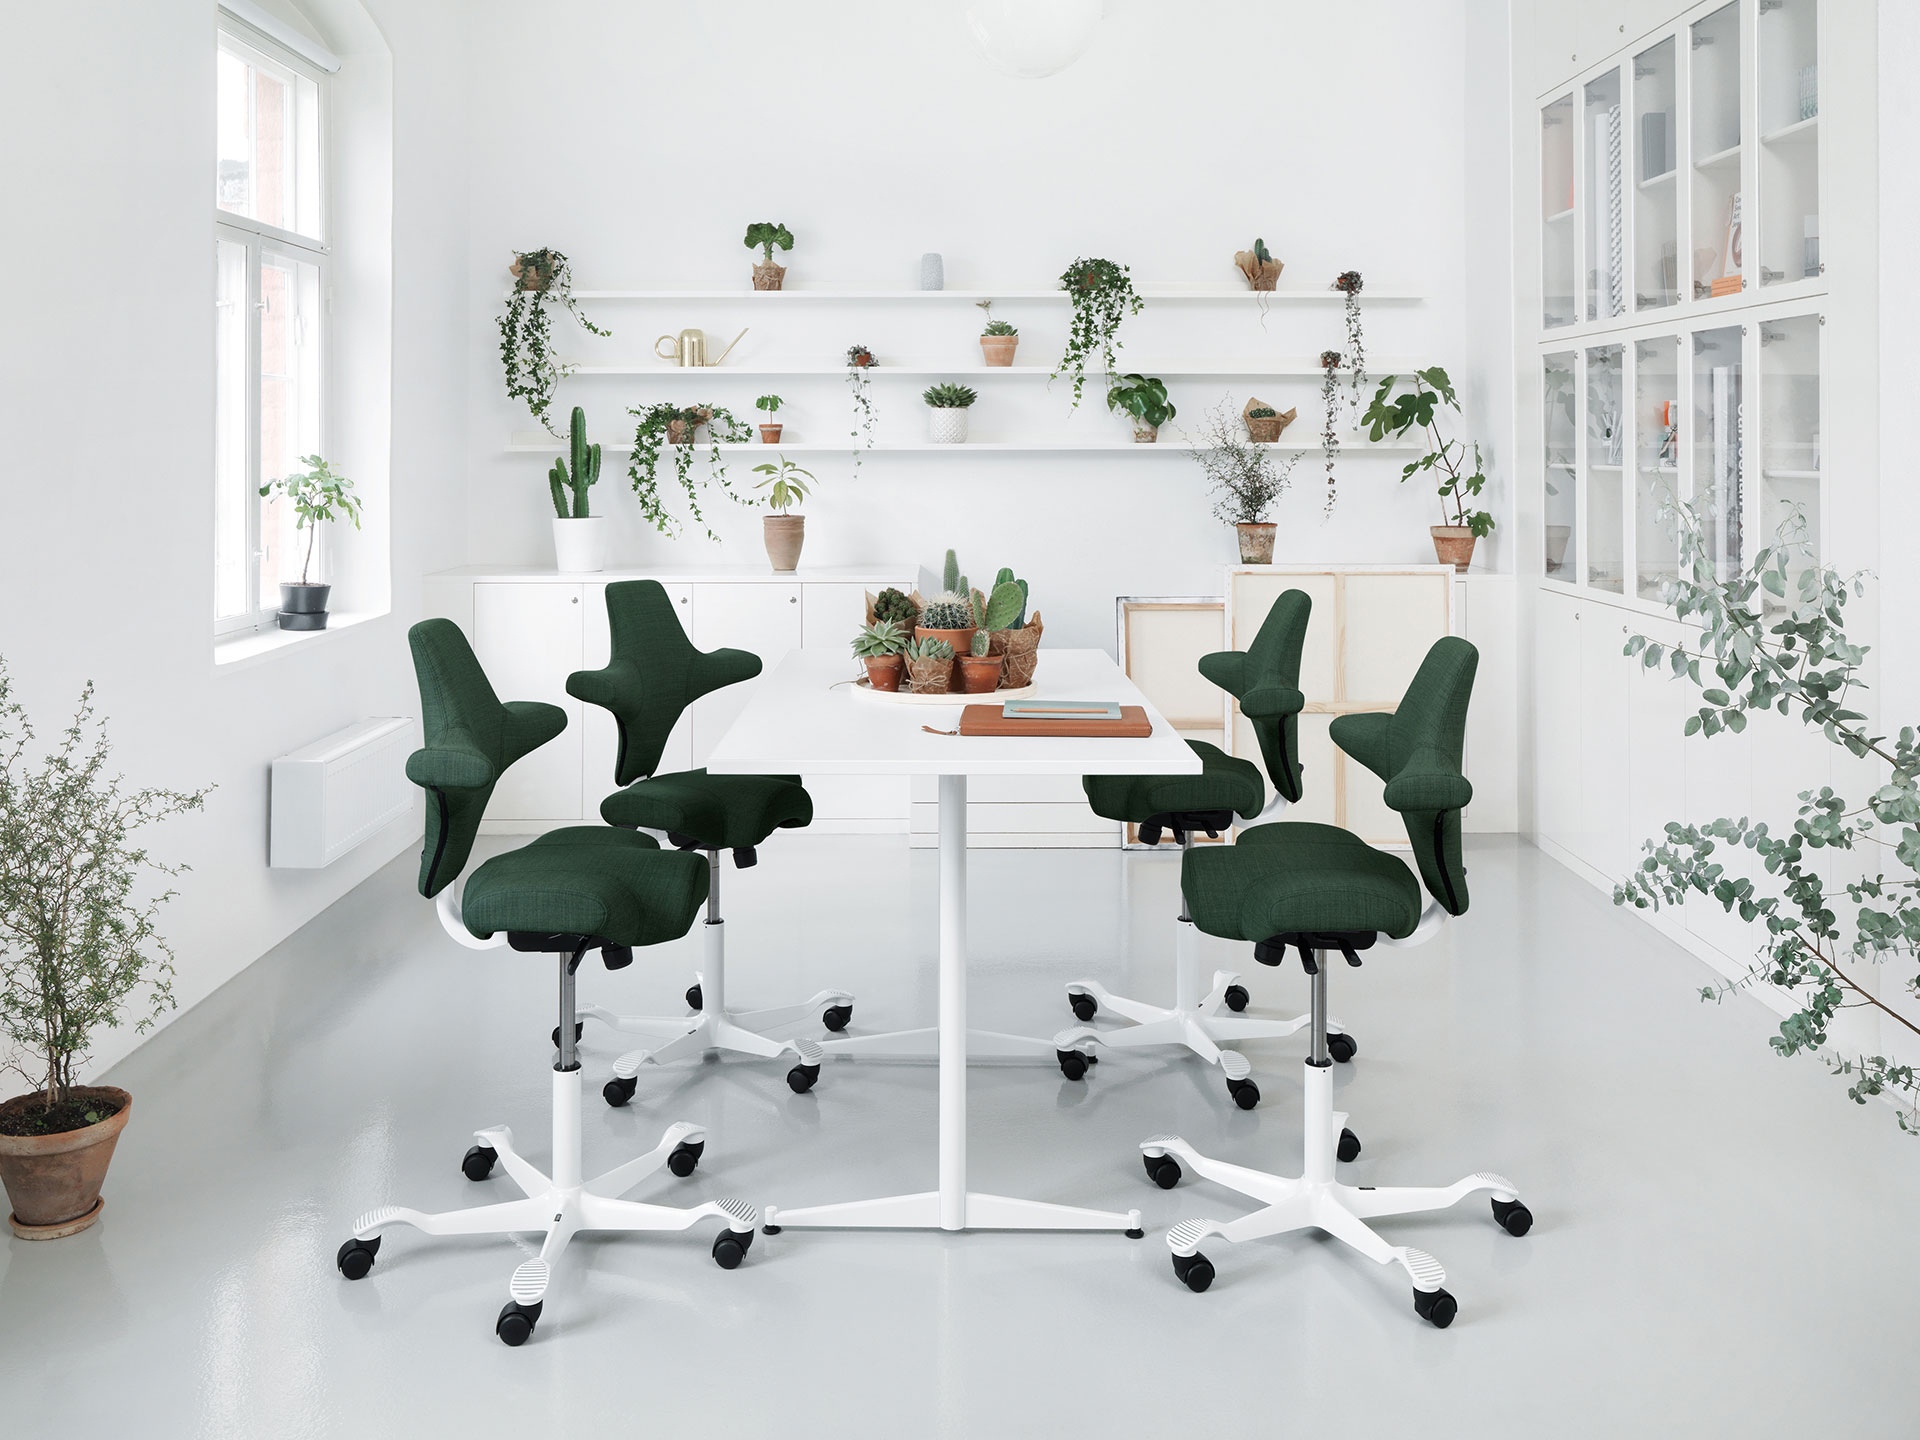 Four dark green HÅG Capisco chairs with white footbase arounf RBM Allround table in white with Cactus on the table and many plants in the white room.